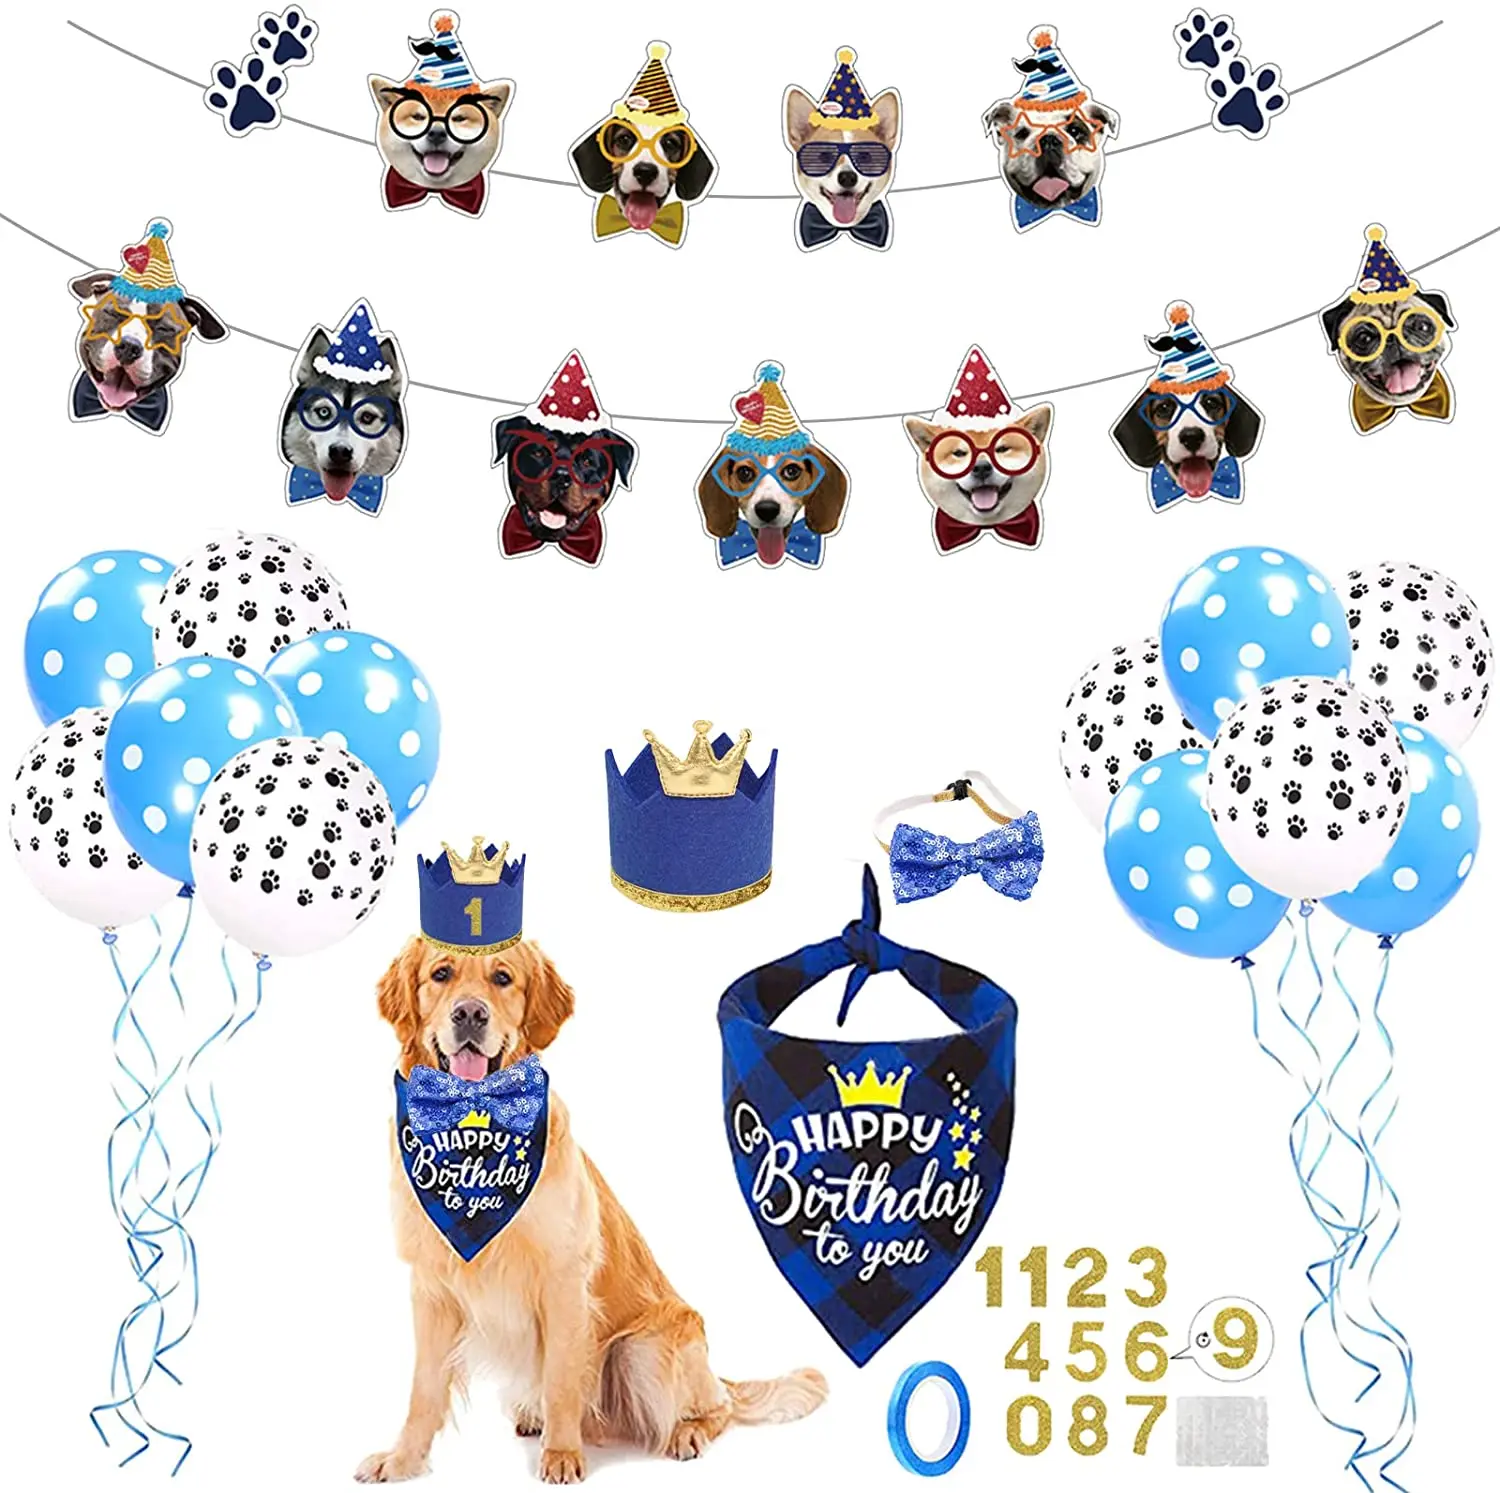 

Dog Party Supplies for Boy Dog Birthday Decorations with Dogs Face Banner Crown Hat Bandana Scarf Bow Tie Balloons for Pet